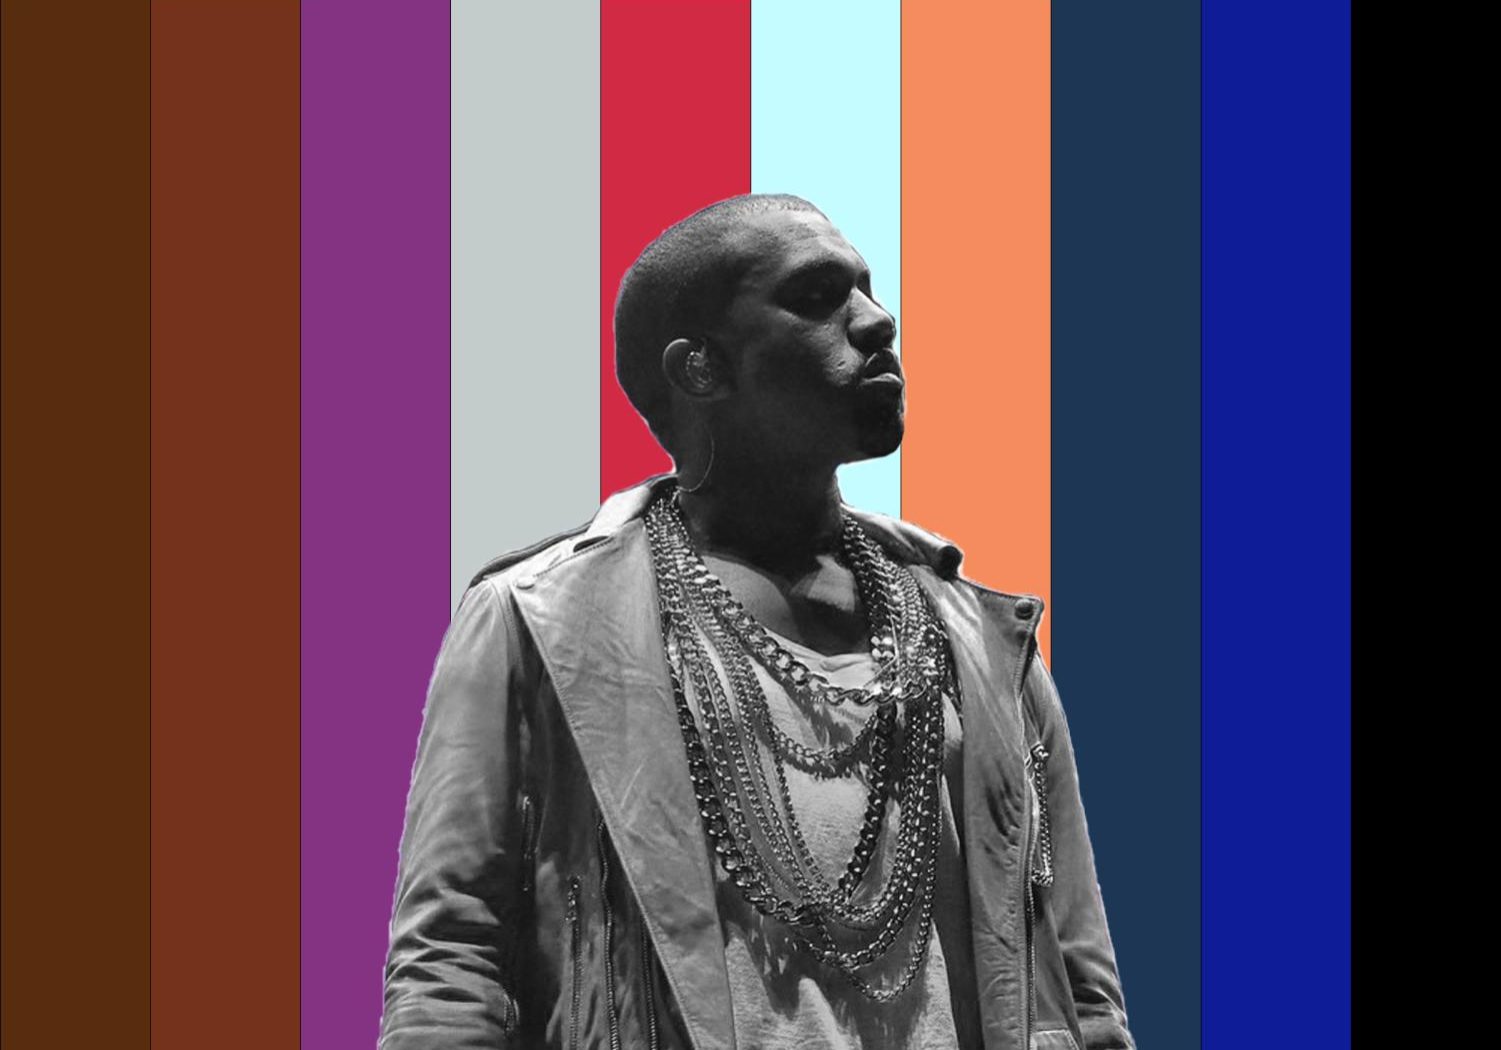 Original photo from <a href="https://www.flickr.com/photos/39096086@N04/5681564160">“Kanye West 09”</a> by <a href="https://www.flickr.com/photos/39096086@N04">Super 45 | Música Independiente</a>, licensed under <a href="https://creativecommons.org/licenses/by-nc/2.0/?ref=openverse ">CC BY-NC 2.0</a>. Graphic designed in Adobe Photoshop by Gavin S. Hudson. 